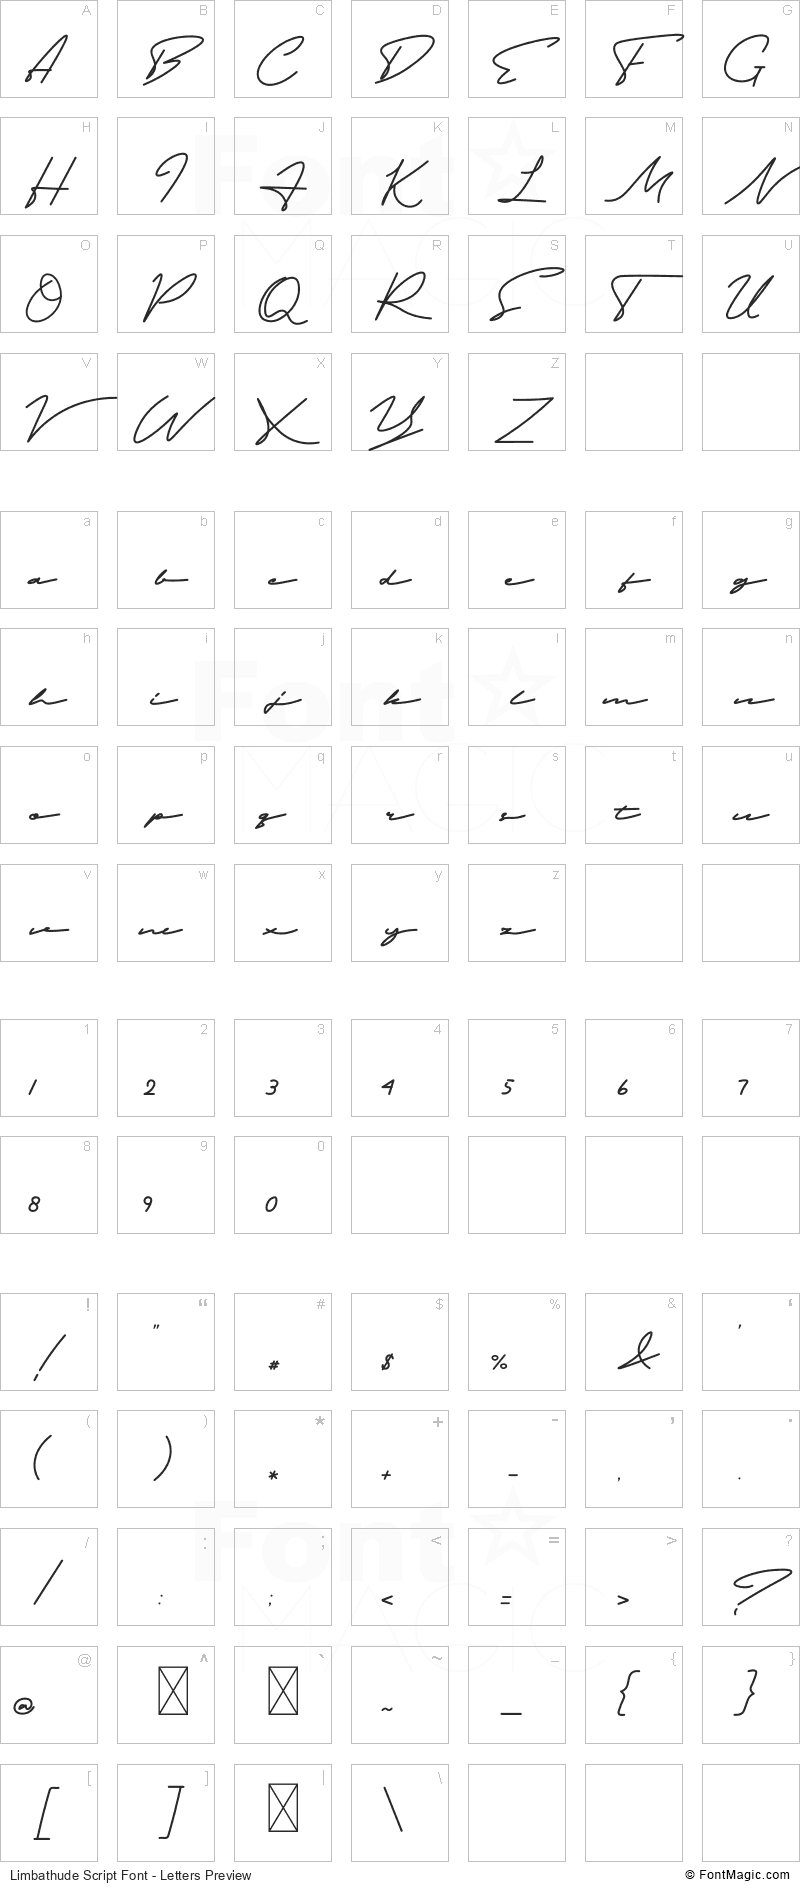 Limbathude Script Font - All Latters Preview Chart